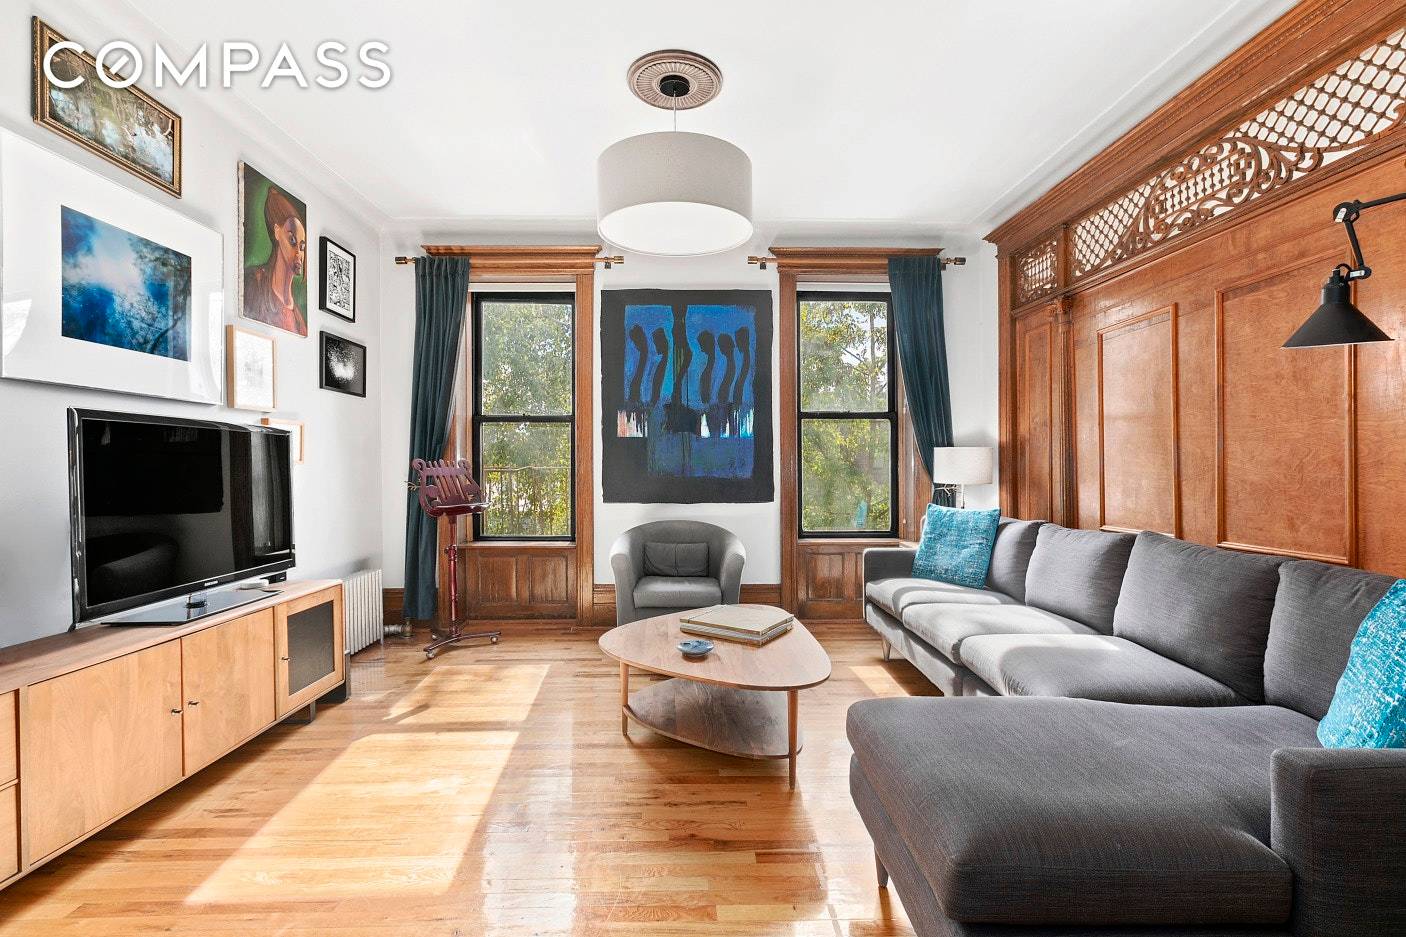 Welcome home to this tranquil, sun filled, artist abode on a prime Carroll Gardens block between Smith and Hoyt Street.